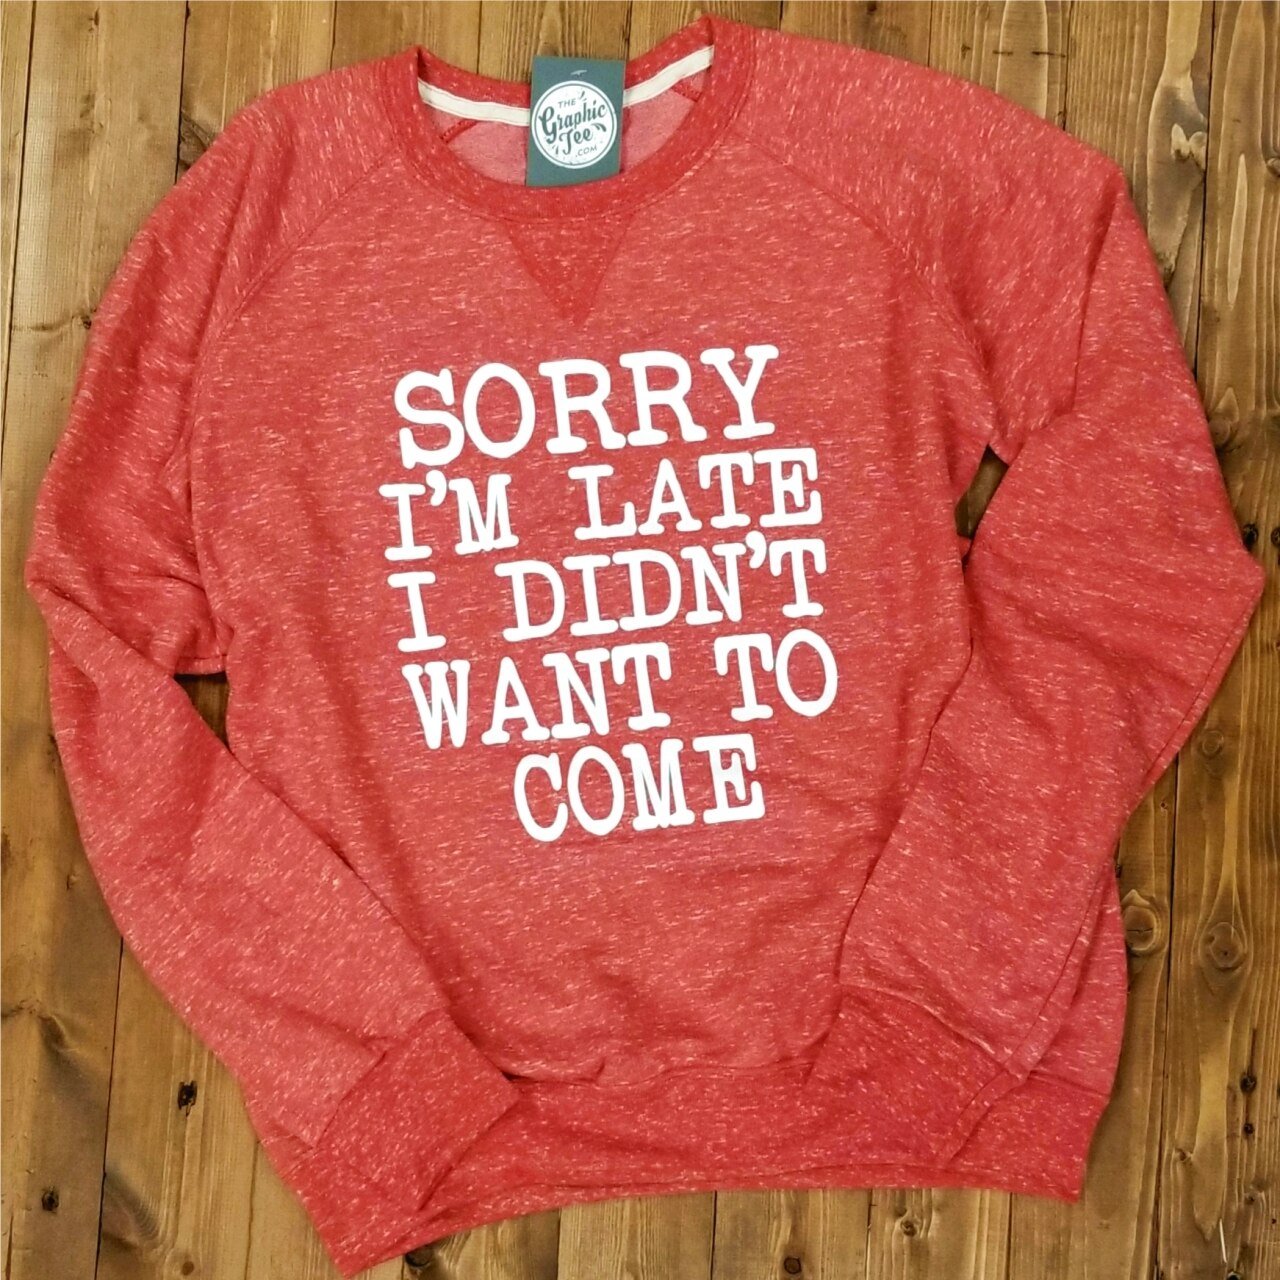 Sorry I'm Late, I Didn't Want to Come - Red Raglan Crew - The Graphic Tee